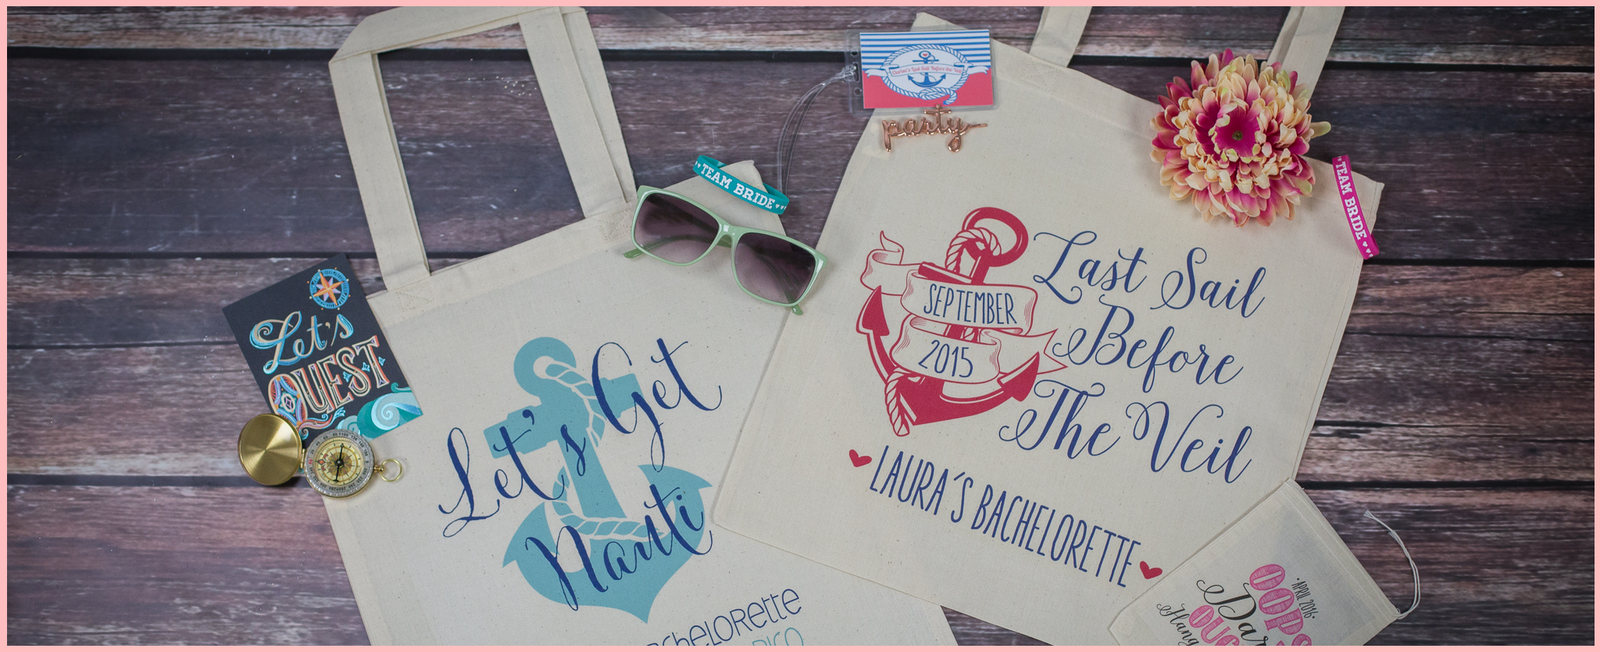 Simple Destination Map - Wedding Welcome Tote Bag - ilulily designs